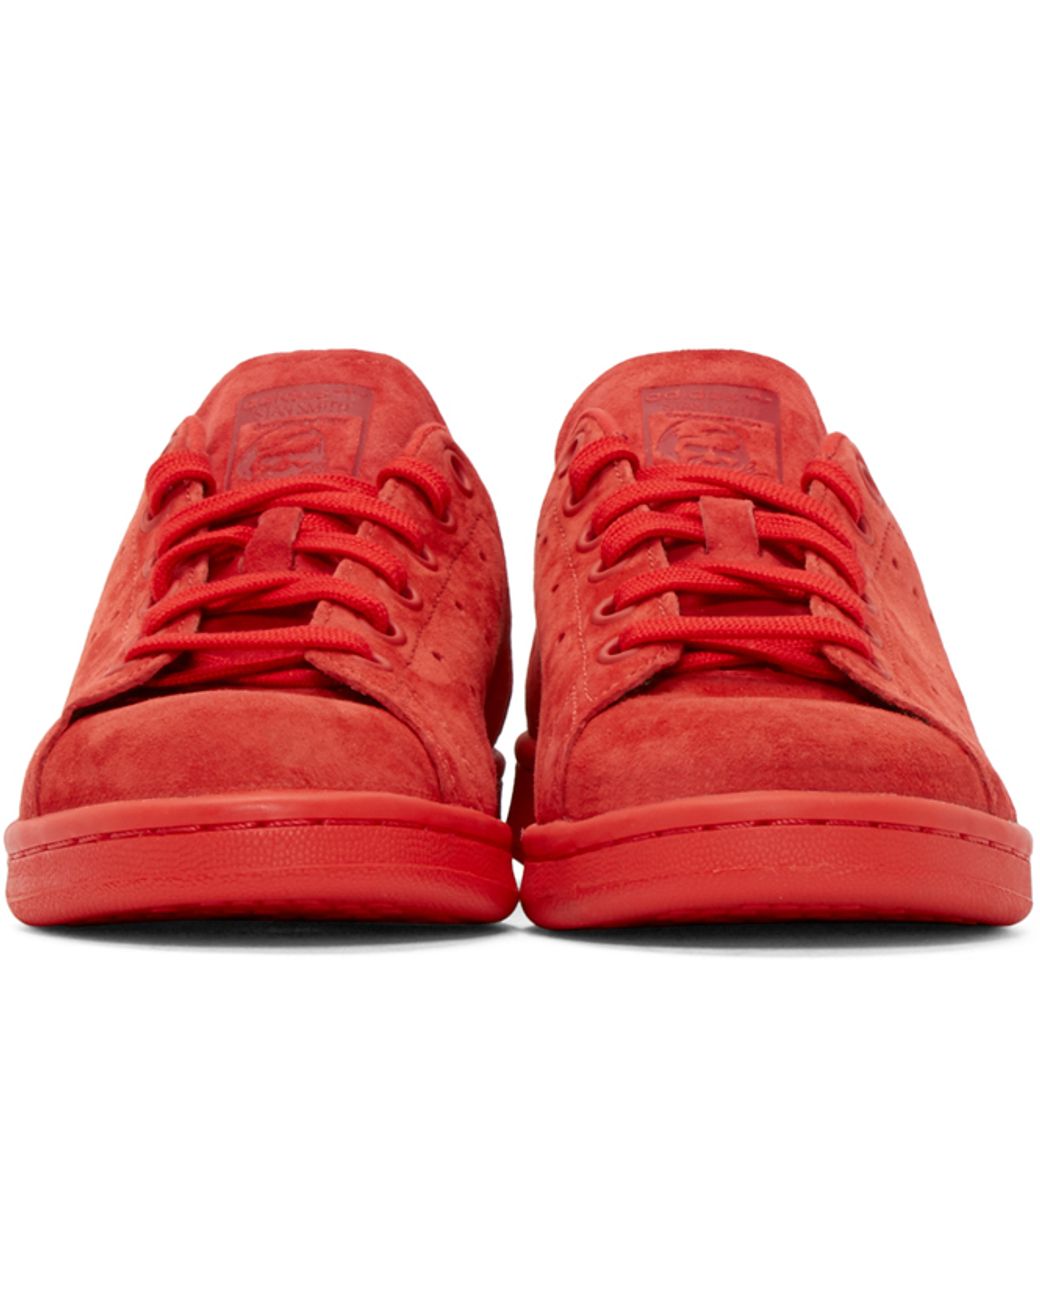 adidas Originals Red Suede Stan Smith Sneakers | Lyst